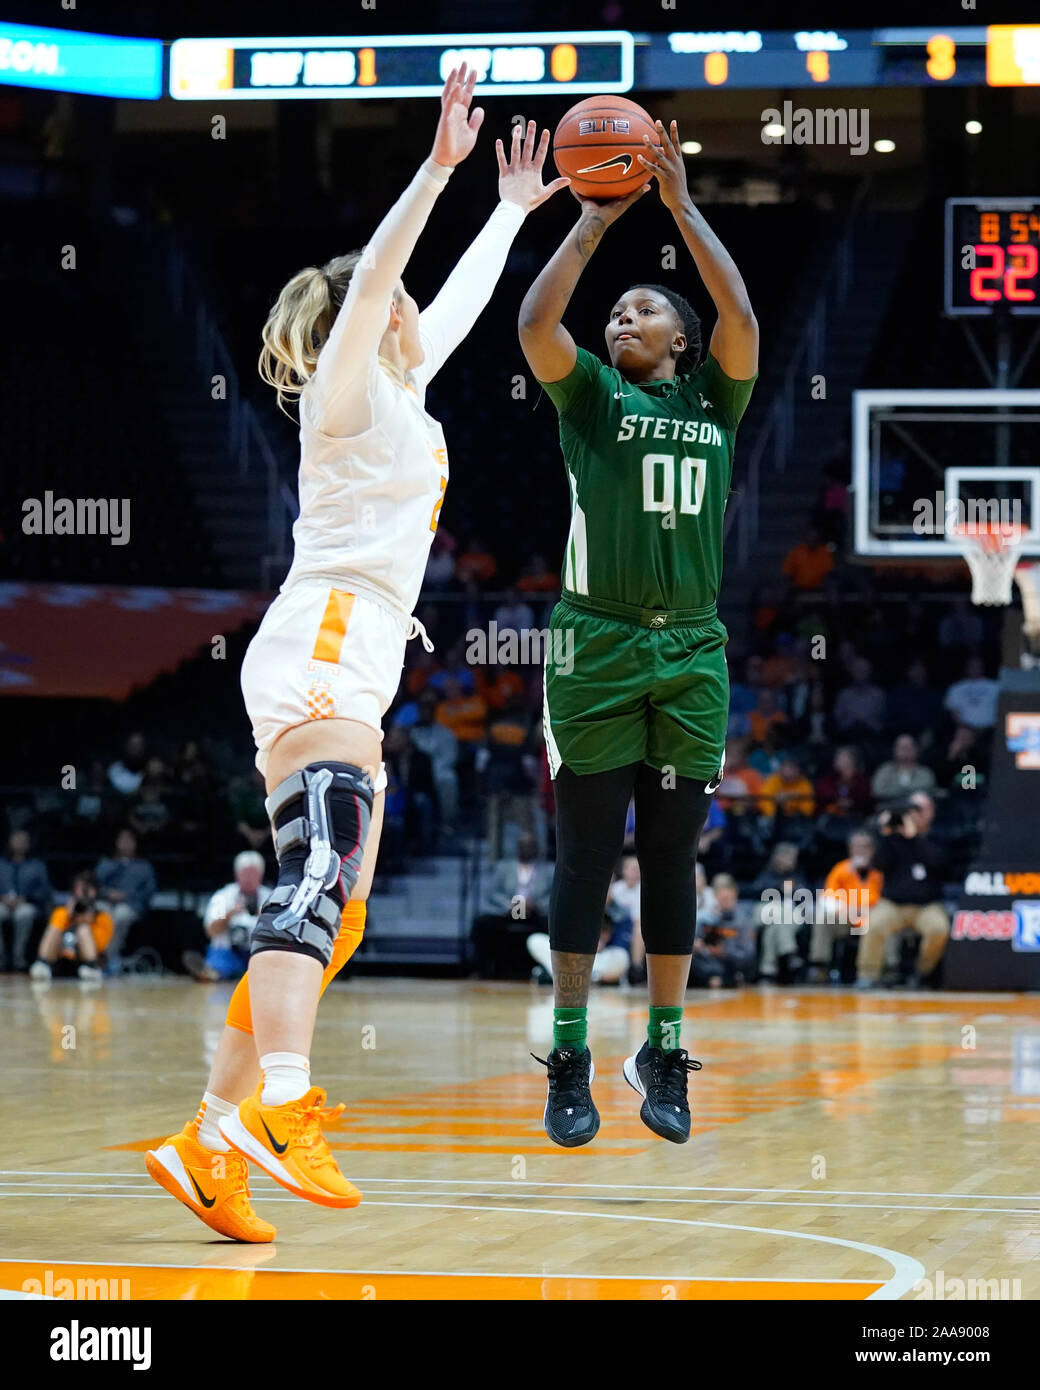 November 18, 2019: Day'Neshia Banks #00 of the Stetson Hatters shoots the  ball over Lou Brown #21 of the Tennessee Lady Vols during the NCAA  basketball game between the University of Tennessee